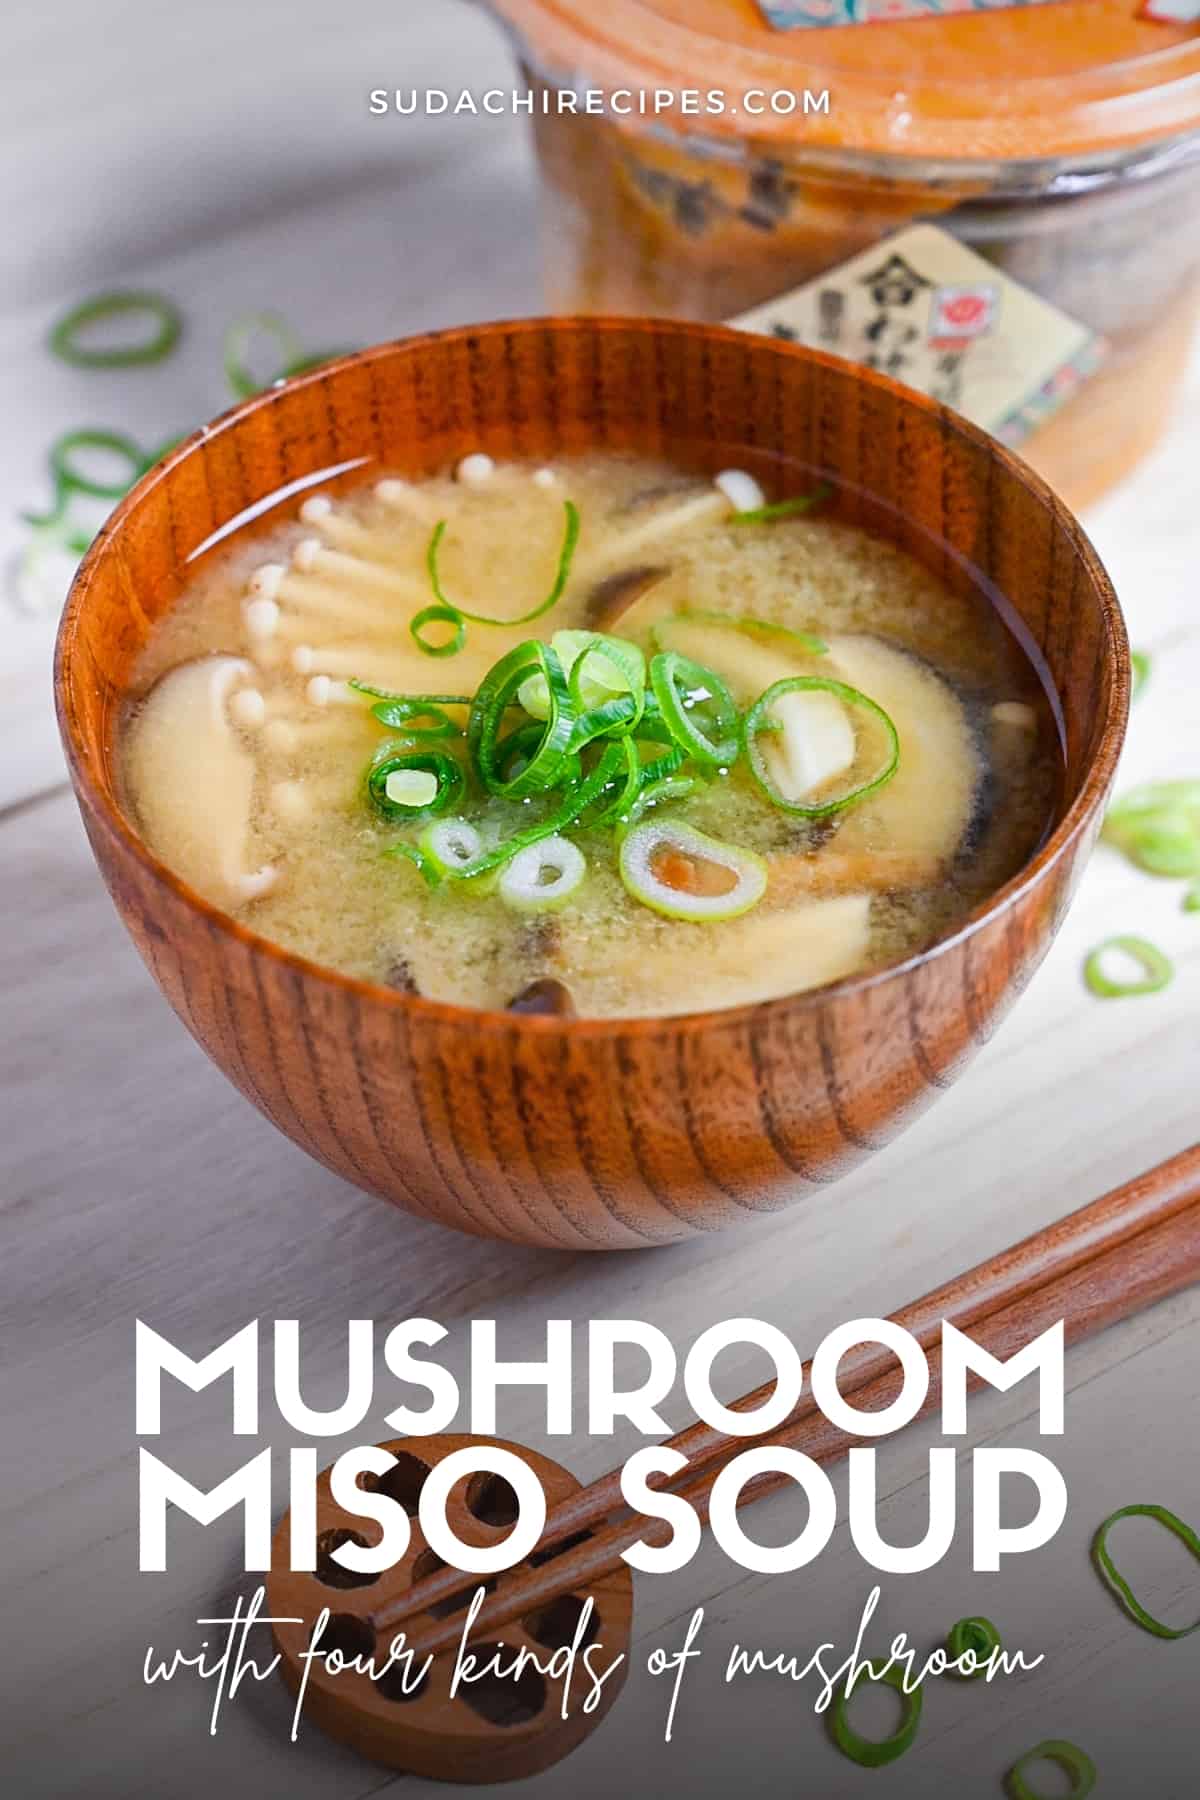 Mushroom miso soup made with 4 kinds of mushroom served in a wooden bowl